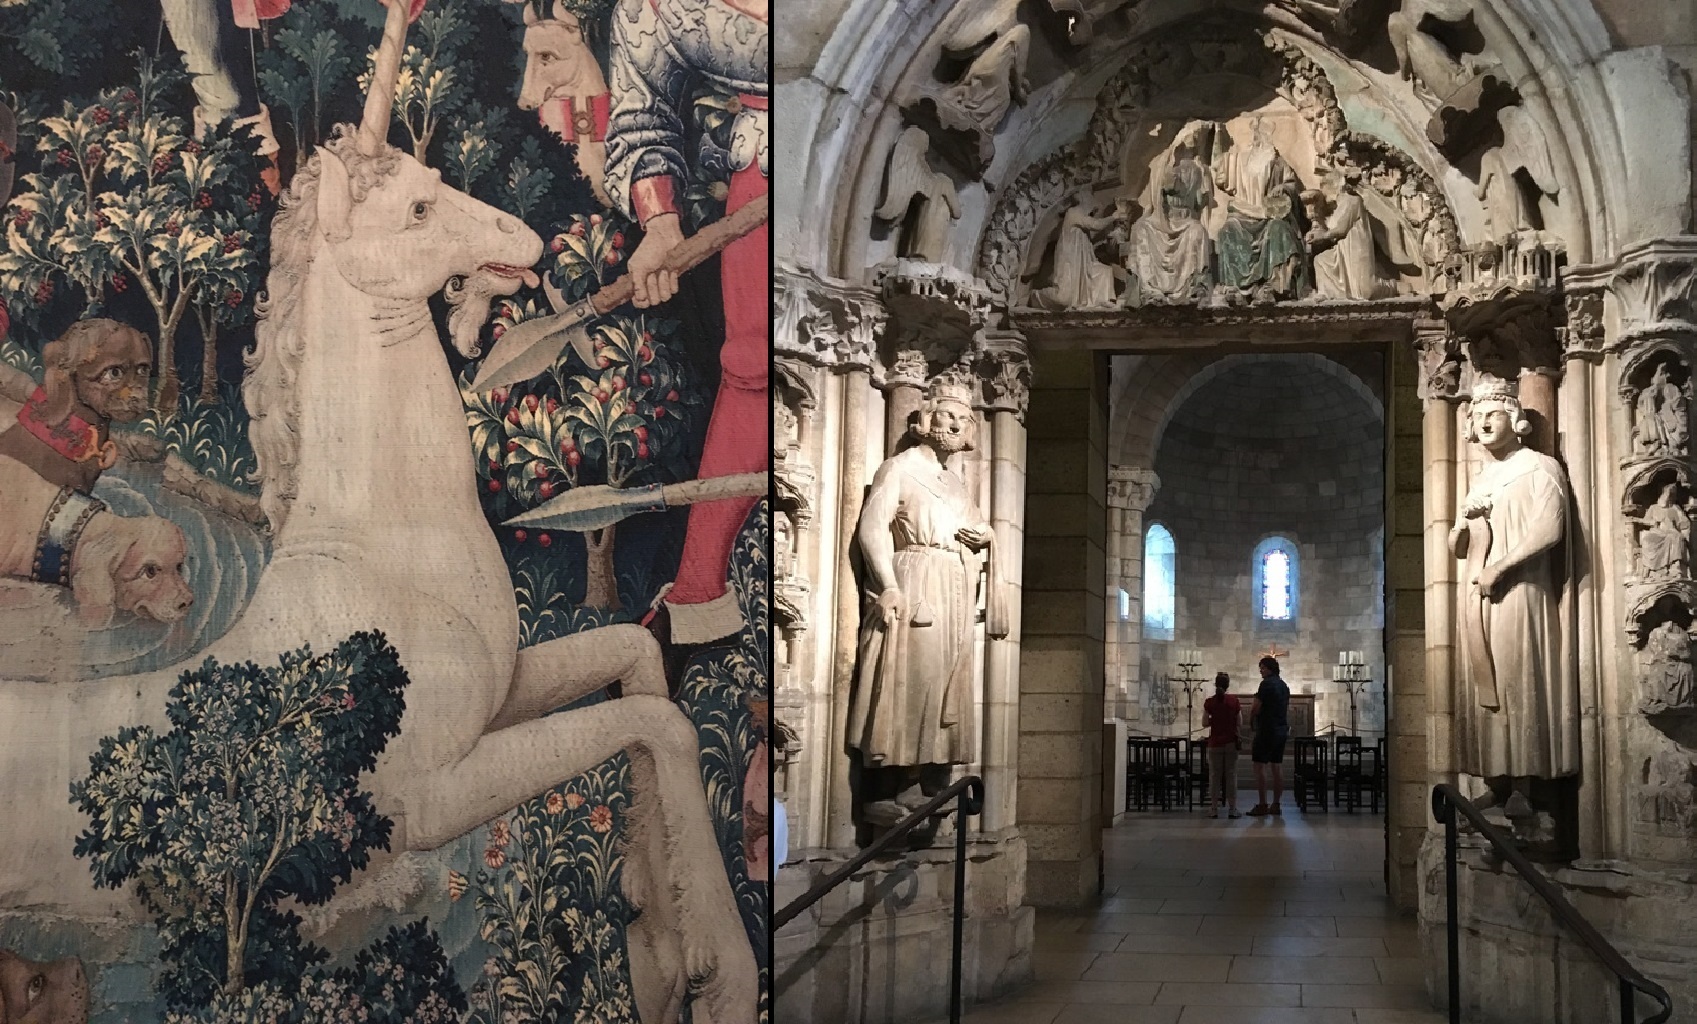 The Met Cloisters: Magnificent Medieval escape from Manhattan